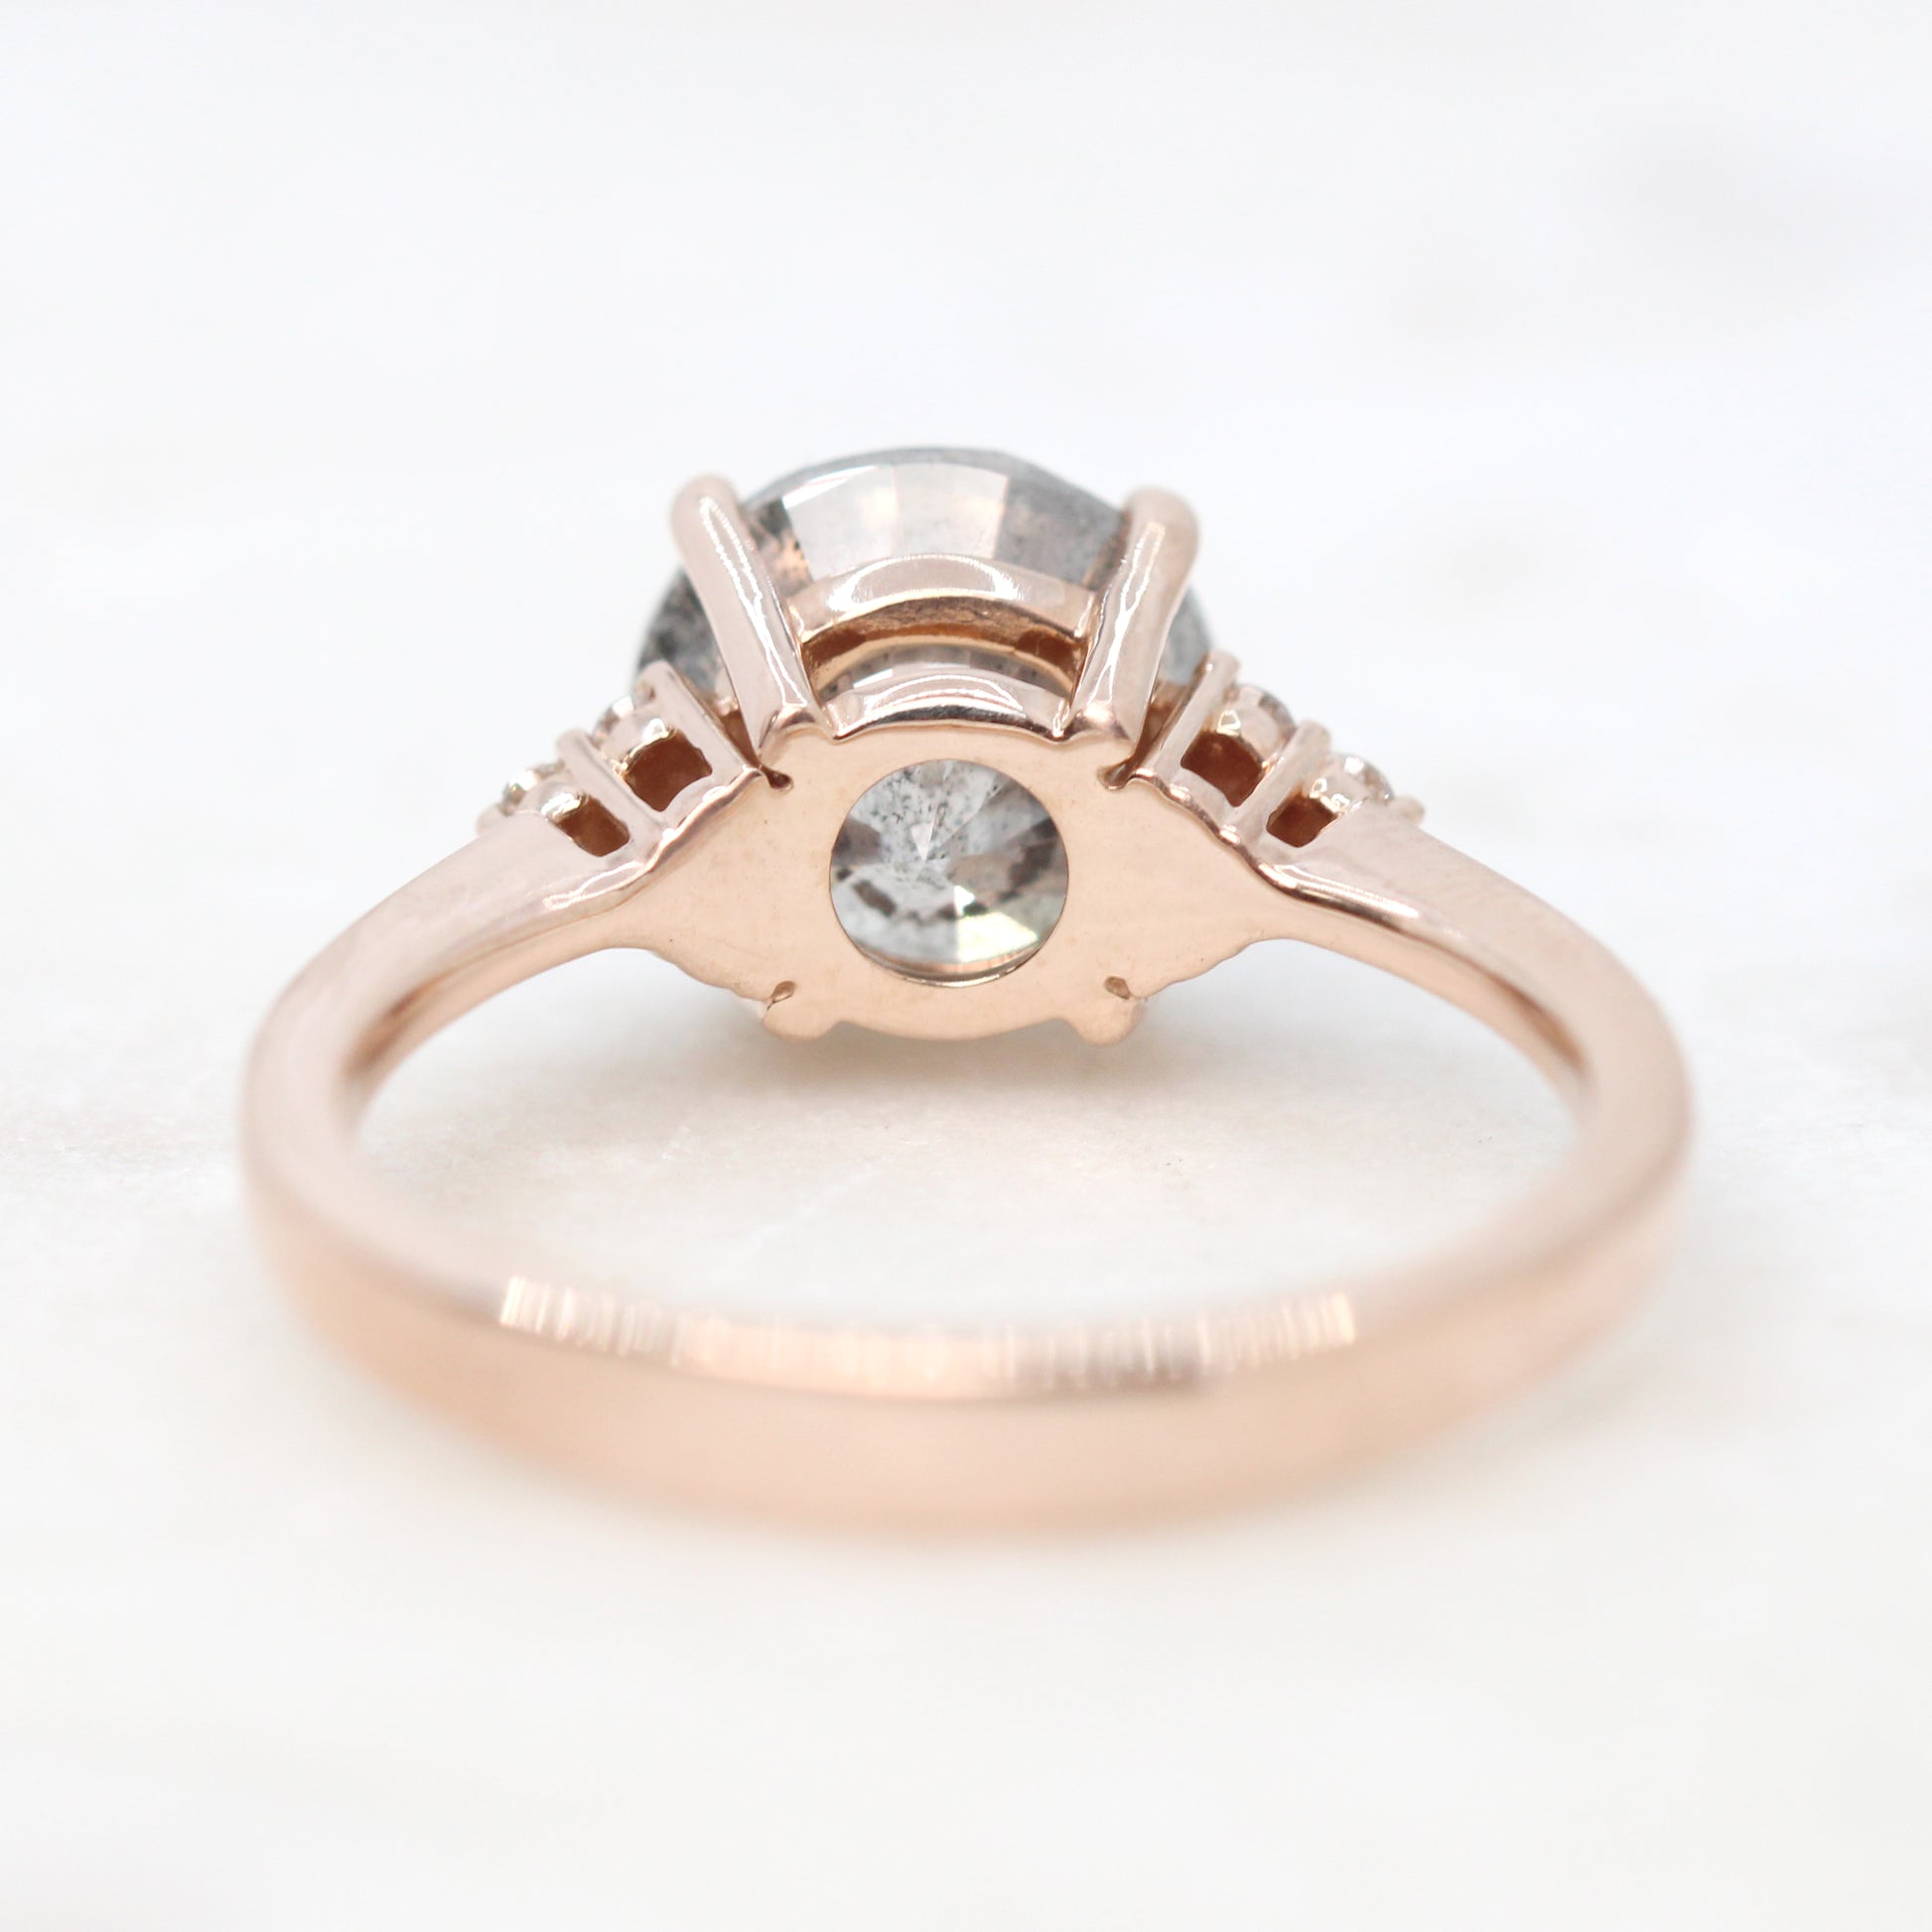 Imogene Ring with a 3.00 Carat Round Bright Gray Celestial Diamond and White Accent Diamonds in 14k Rose Gold - Ready to Size and Ship - Midwinter Co. Alternative Bridal Rings and Modern Fine Jewelry